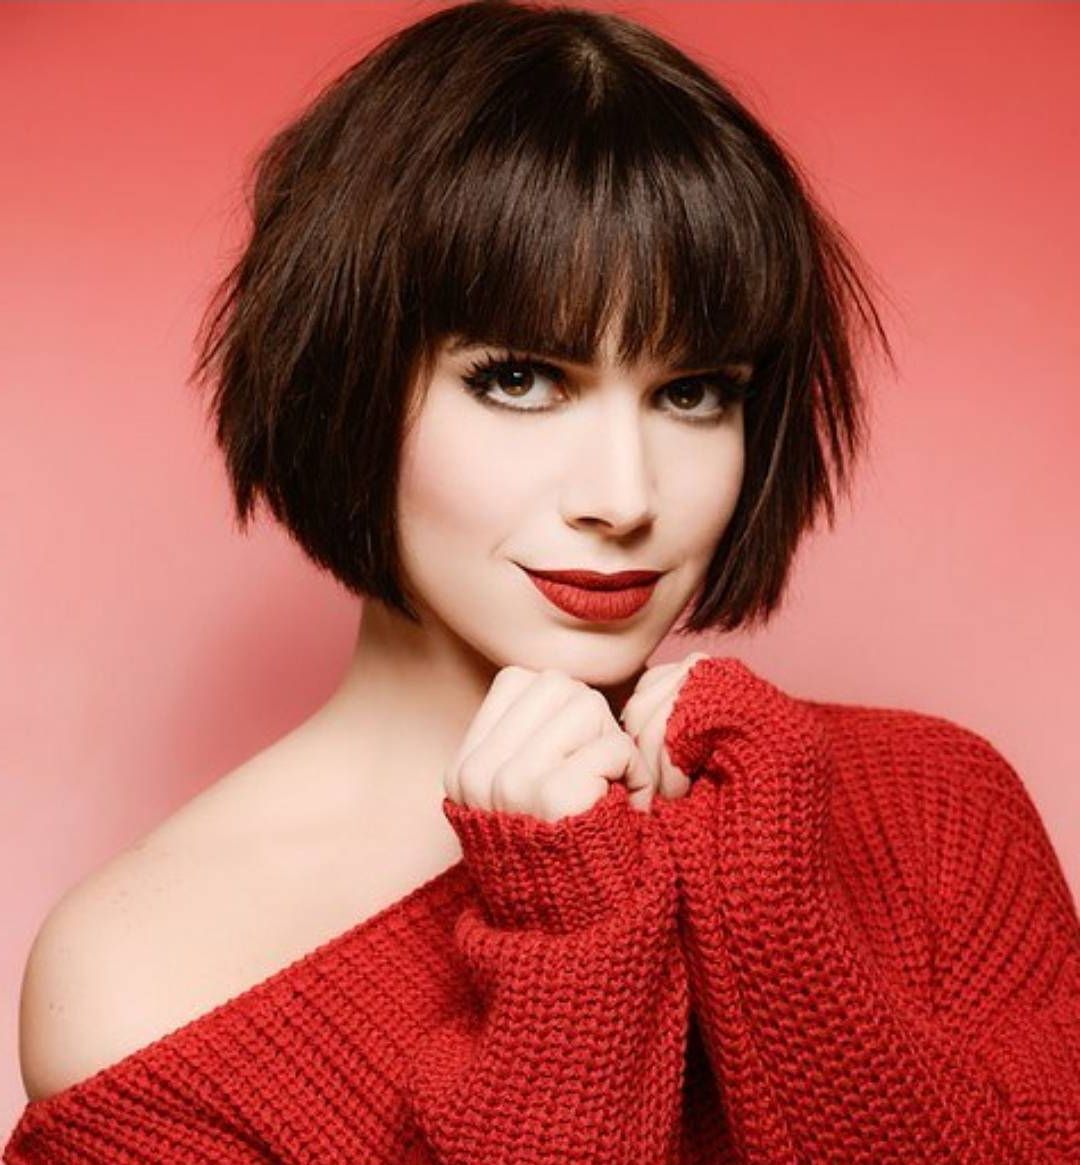 10 Chic Short Bob Haircuts That Balance Your Face Shape! Pertaining To Purple Tinted Off Centered Bob Hairstyles (View 14 of 20)